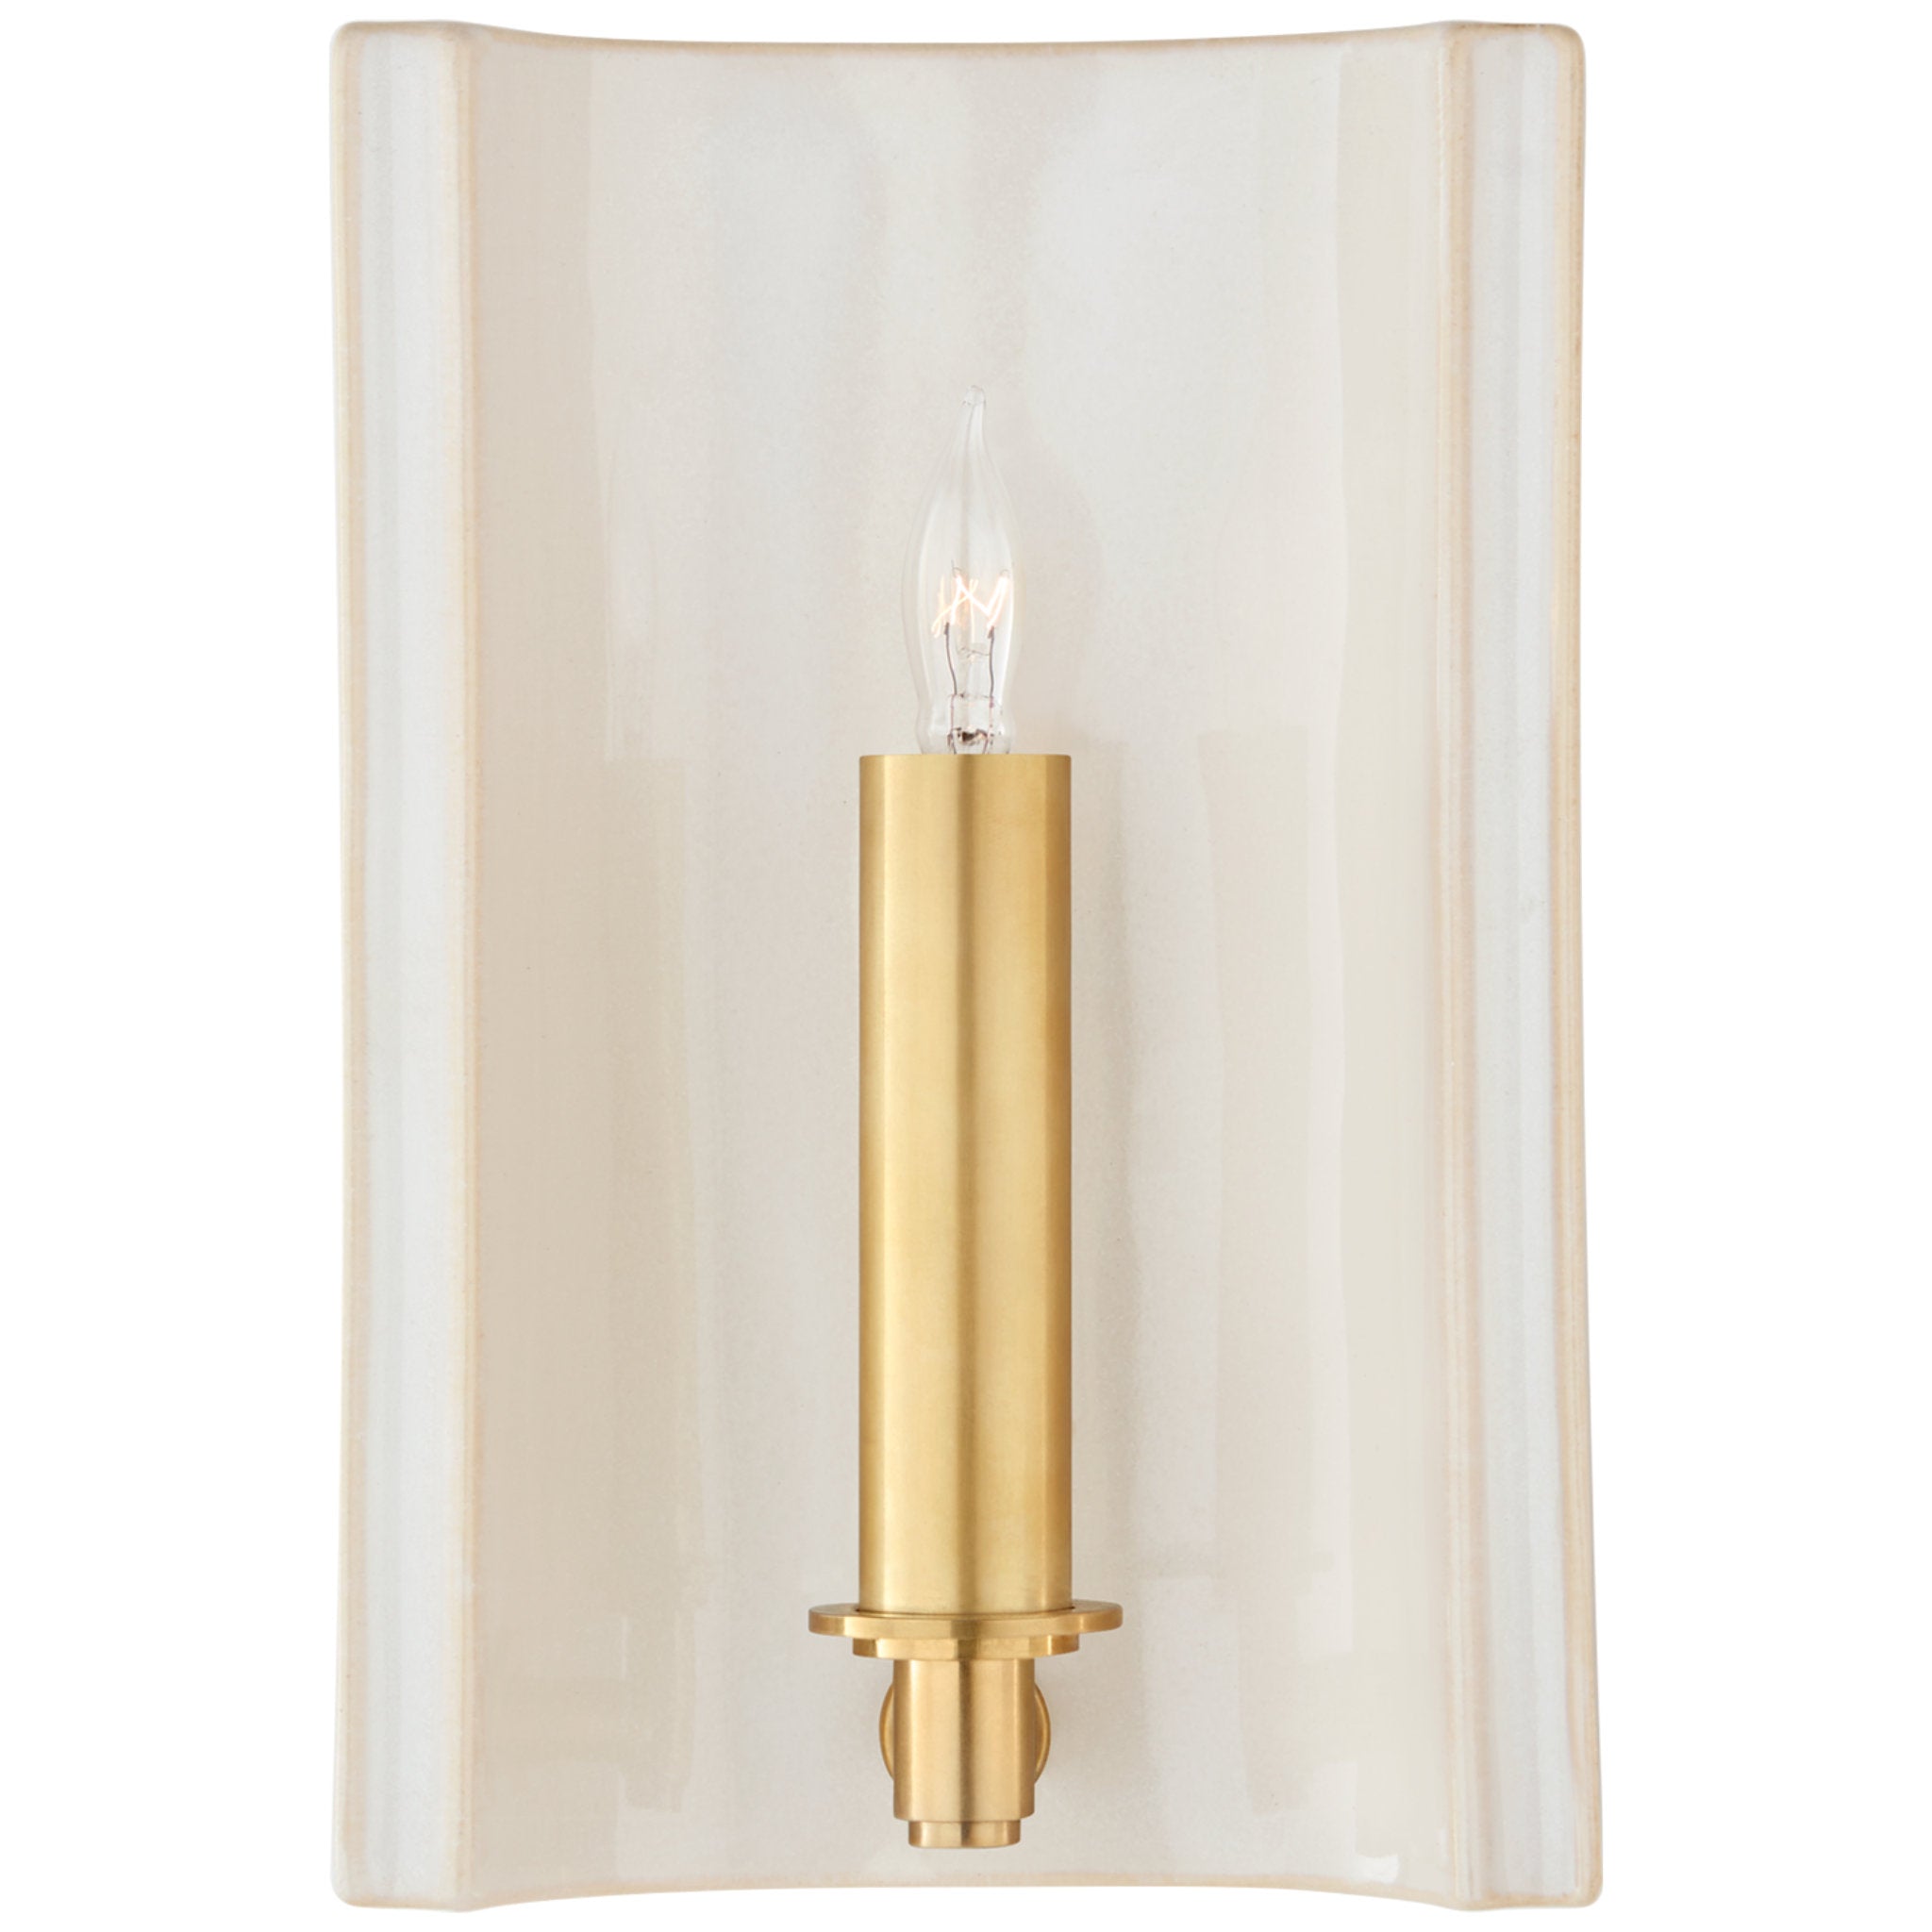 Christopher Spitzmiller Leeds Small Rectangle Sconce in Ivory